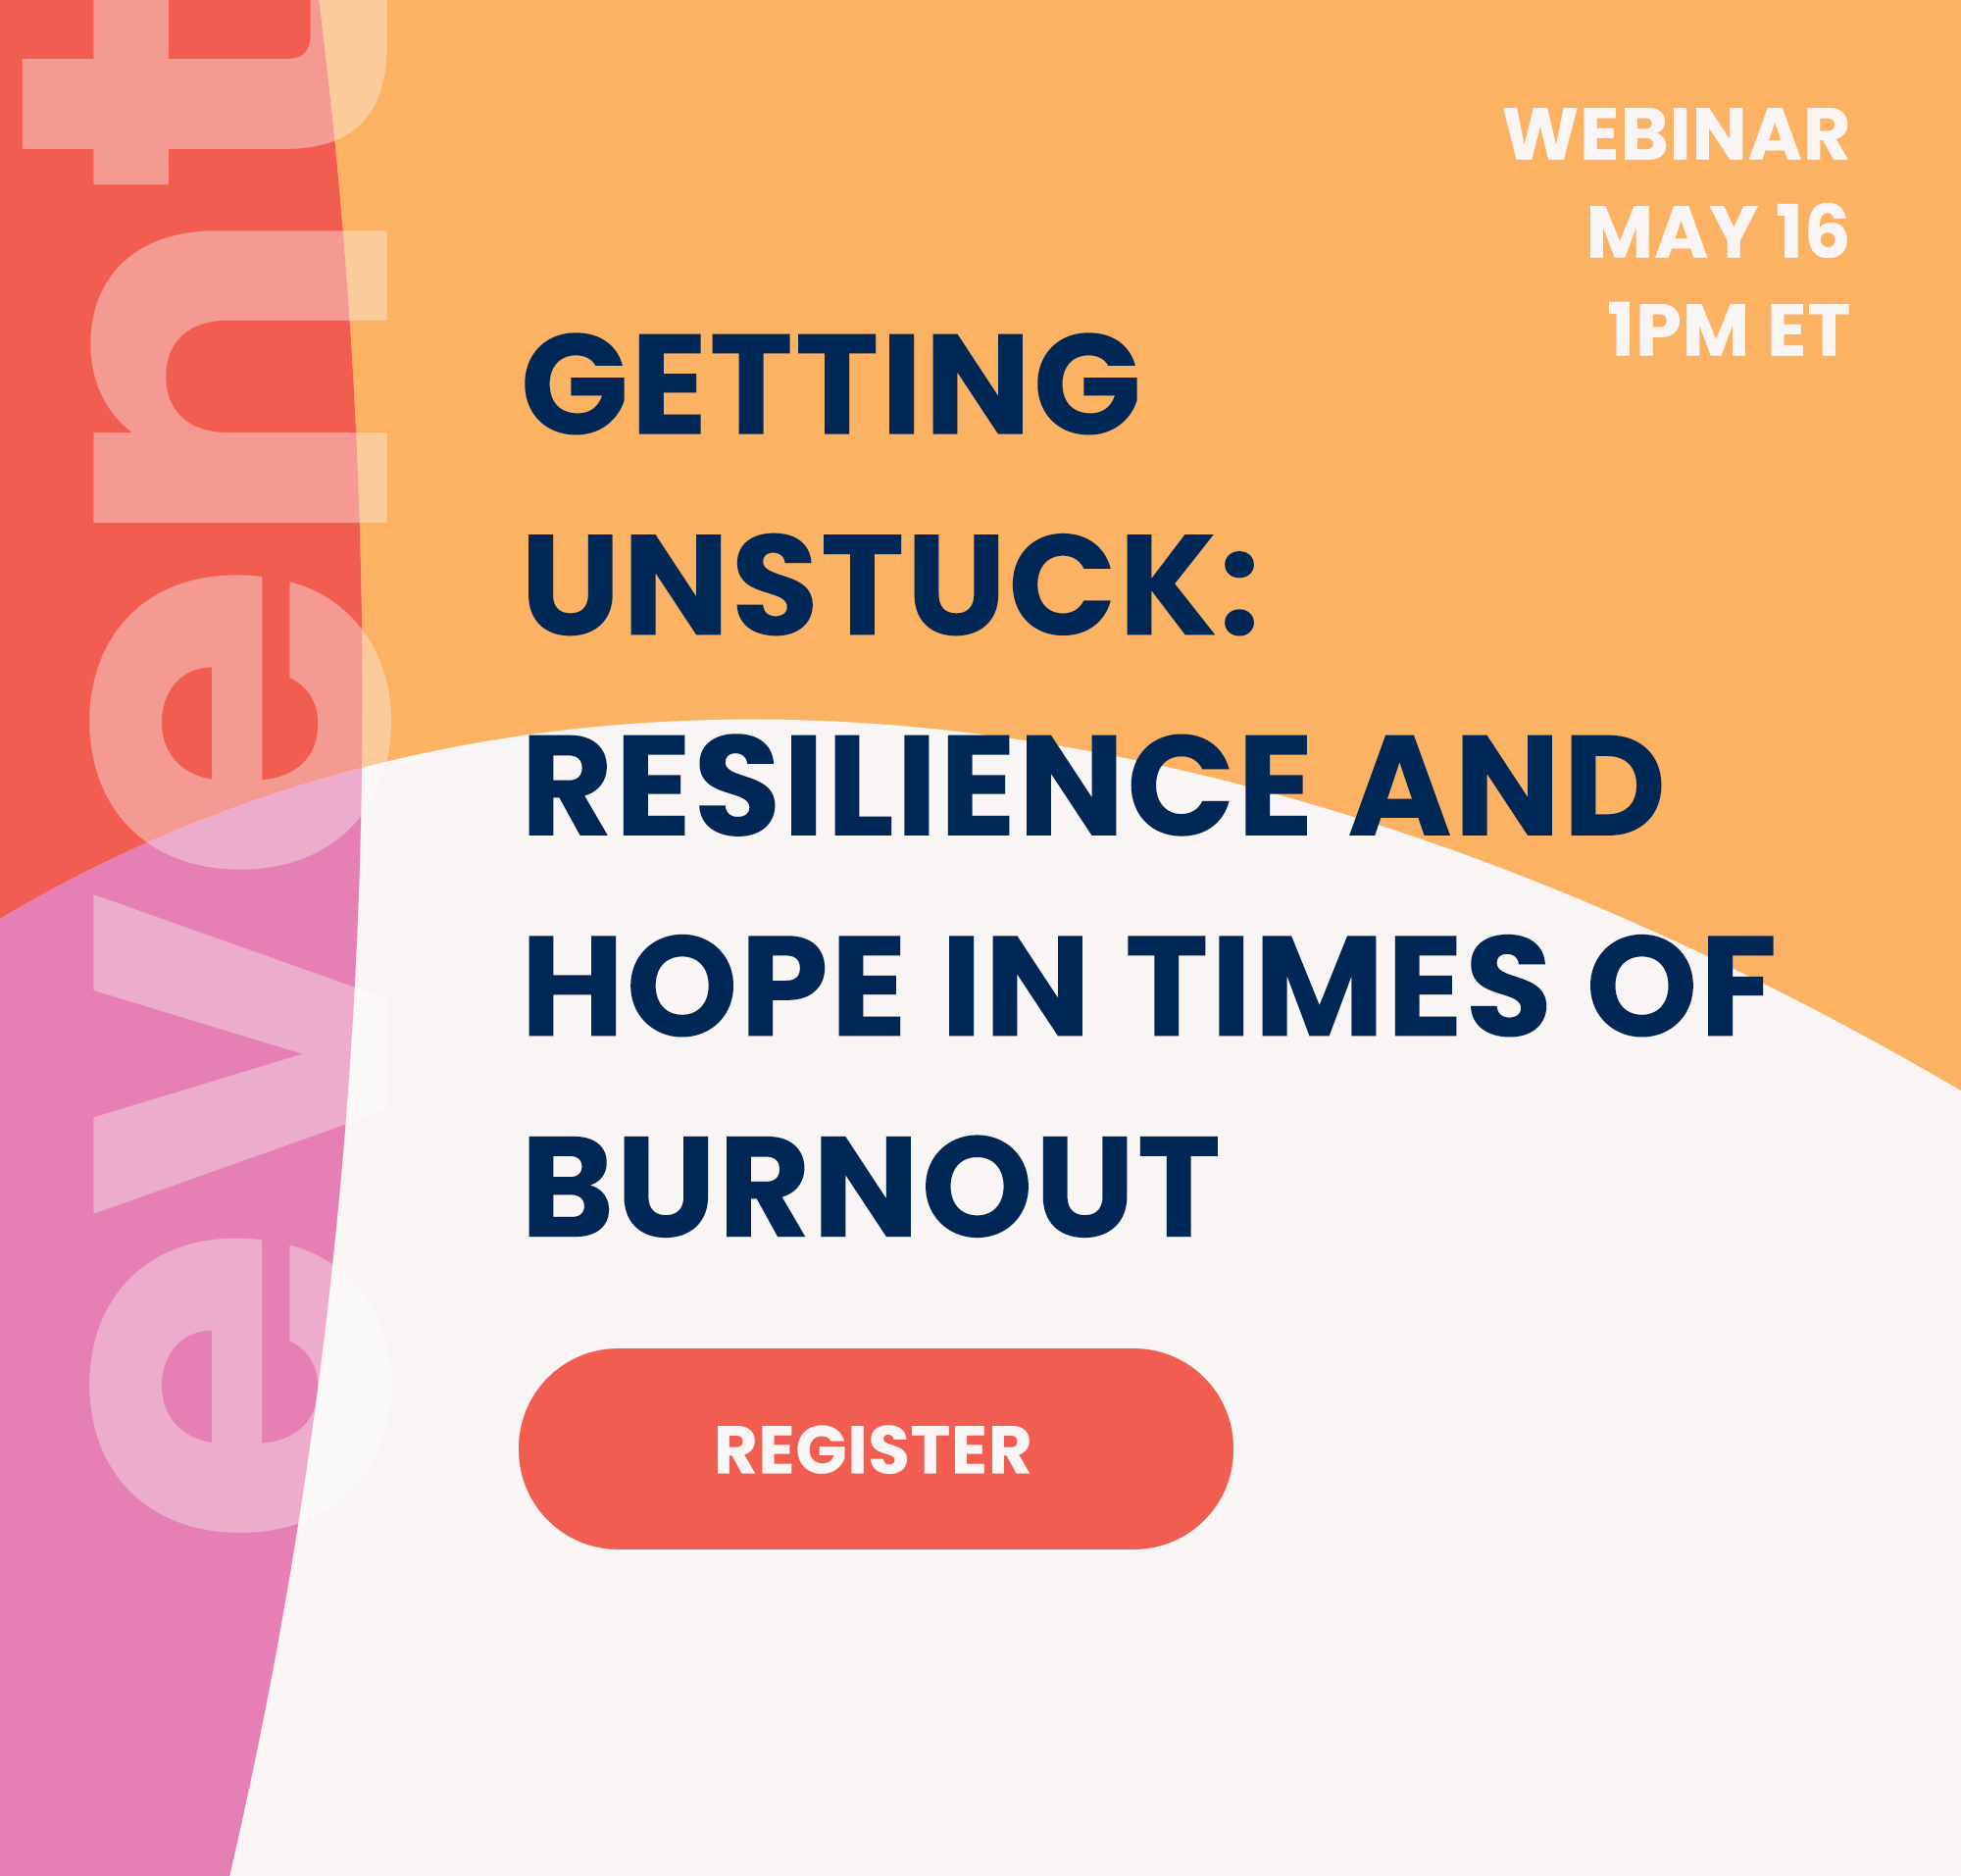 Register for the May 16th Webinar